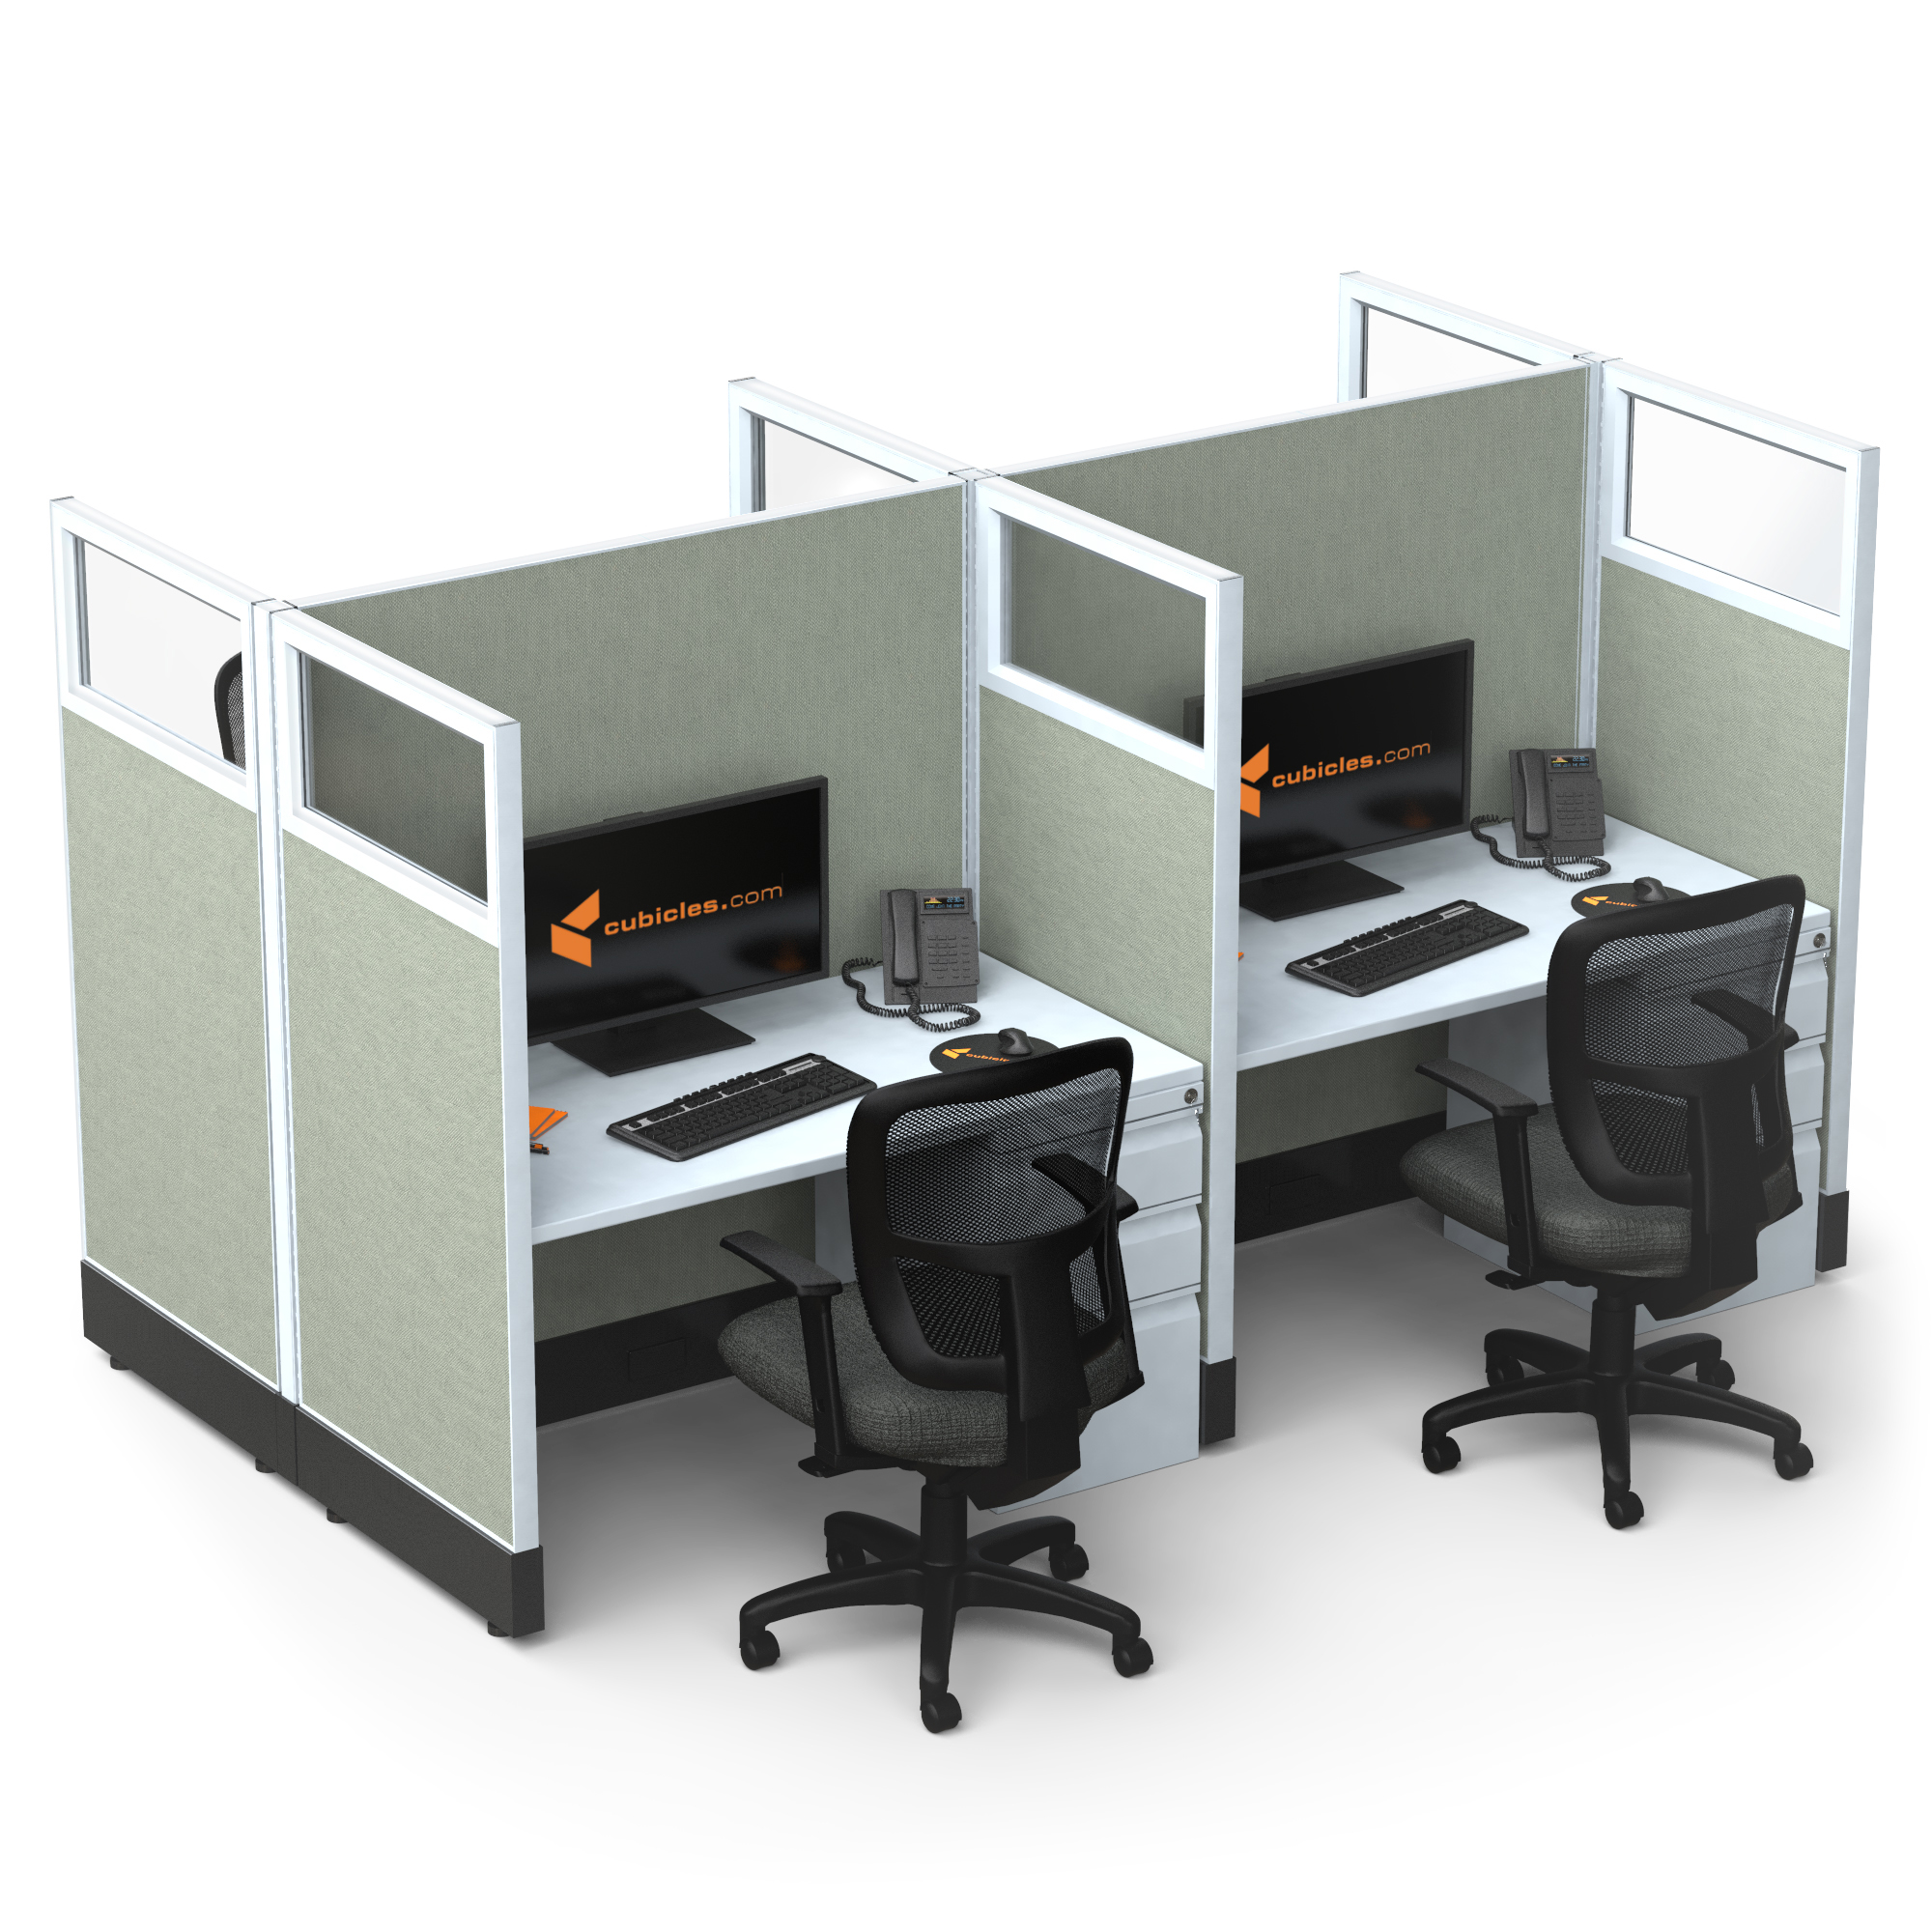 Hot desking cubicle workstations 4c pack powered